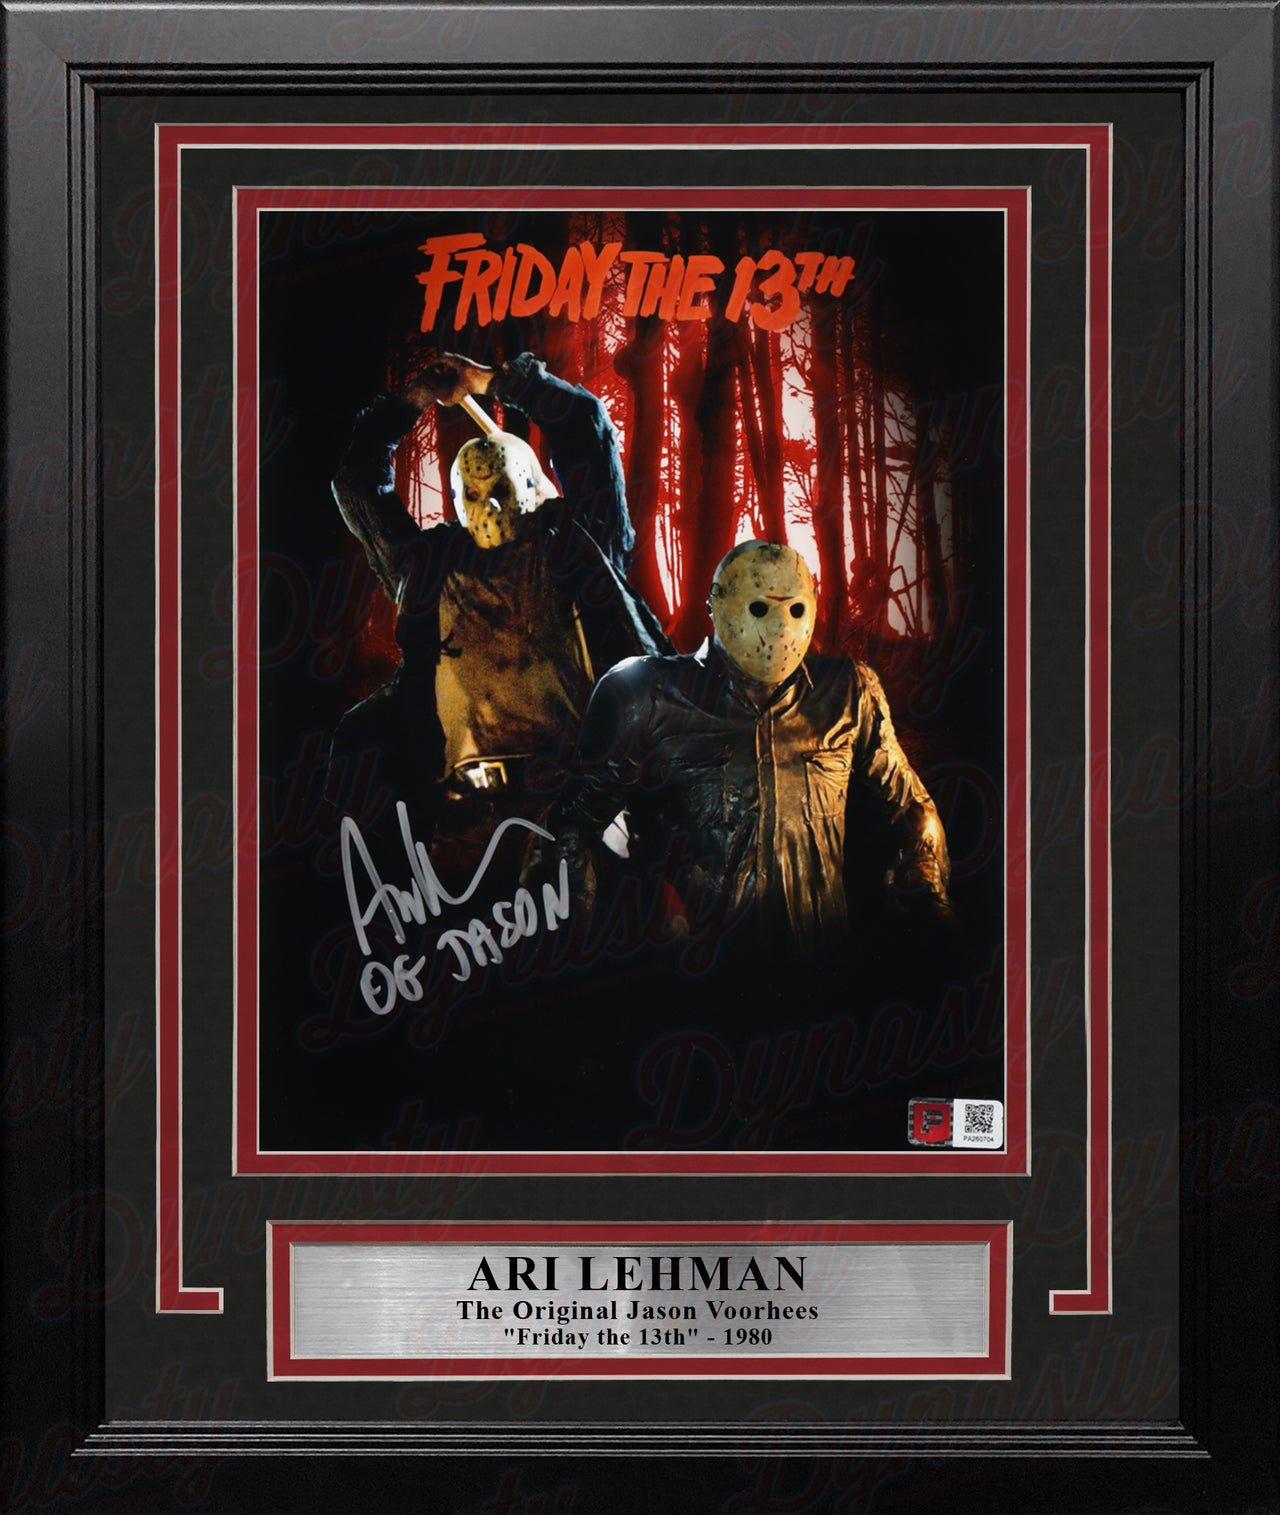 Ari Lehman Autographed "Friday the 13th" Jason Voorhees 8" x 10" Framed Movie Photo - Dynasty Sports & Framing 